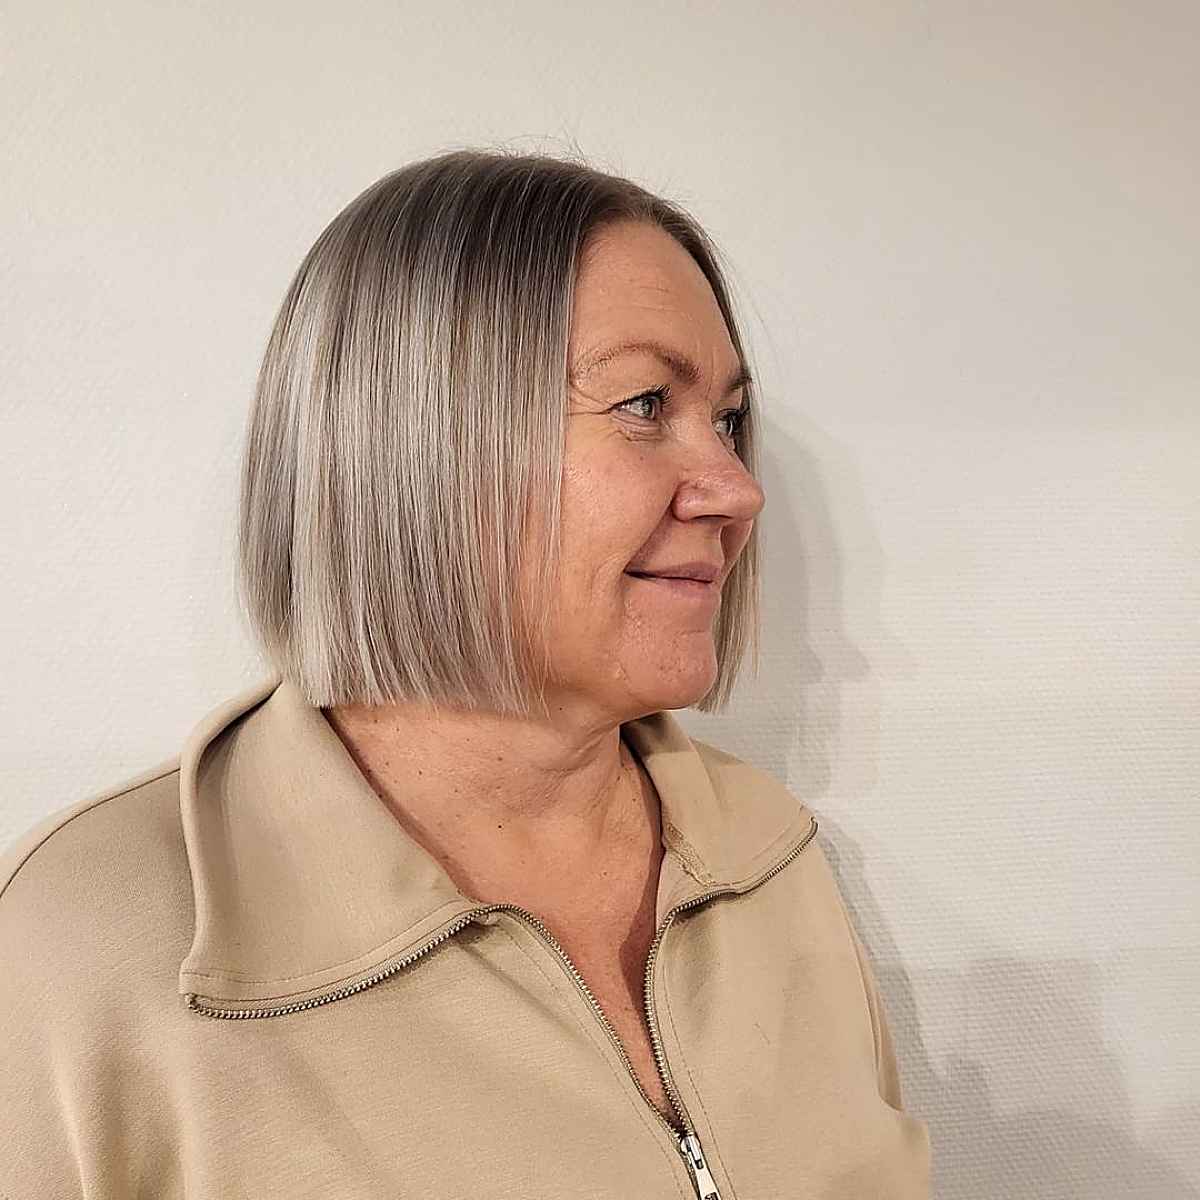 Hairstyle for heavy set women over 50 with Thin Hair